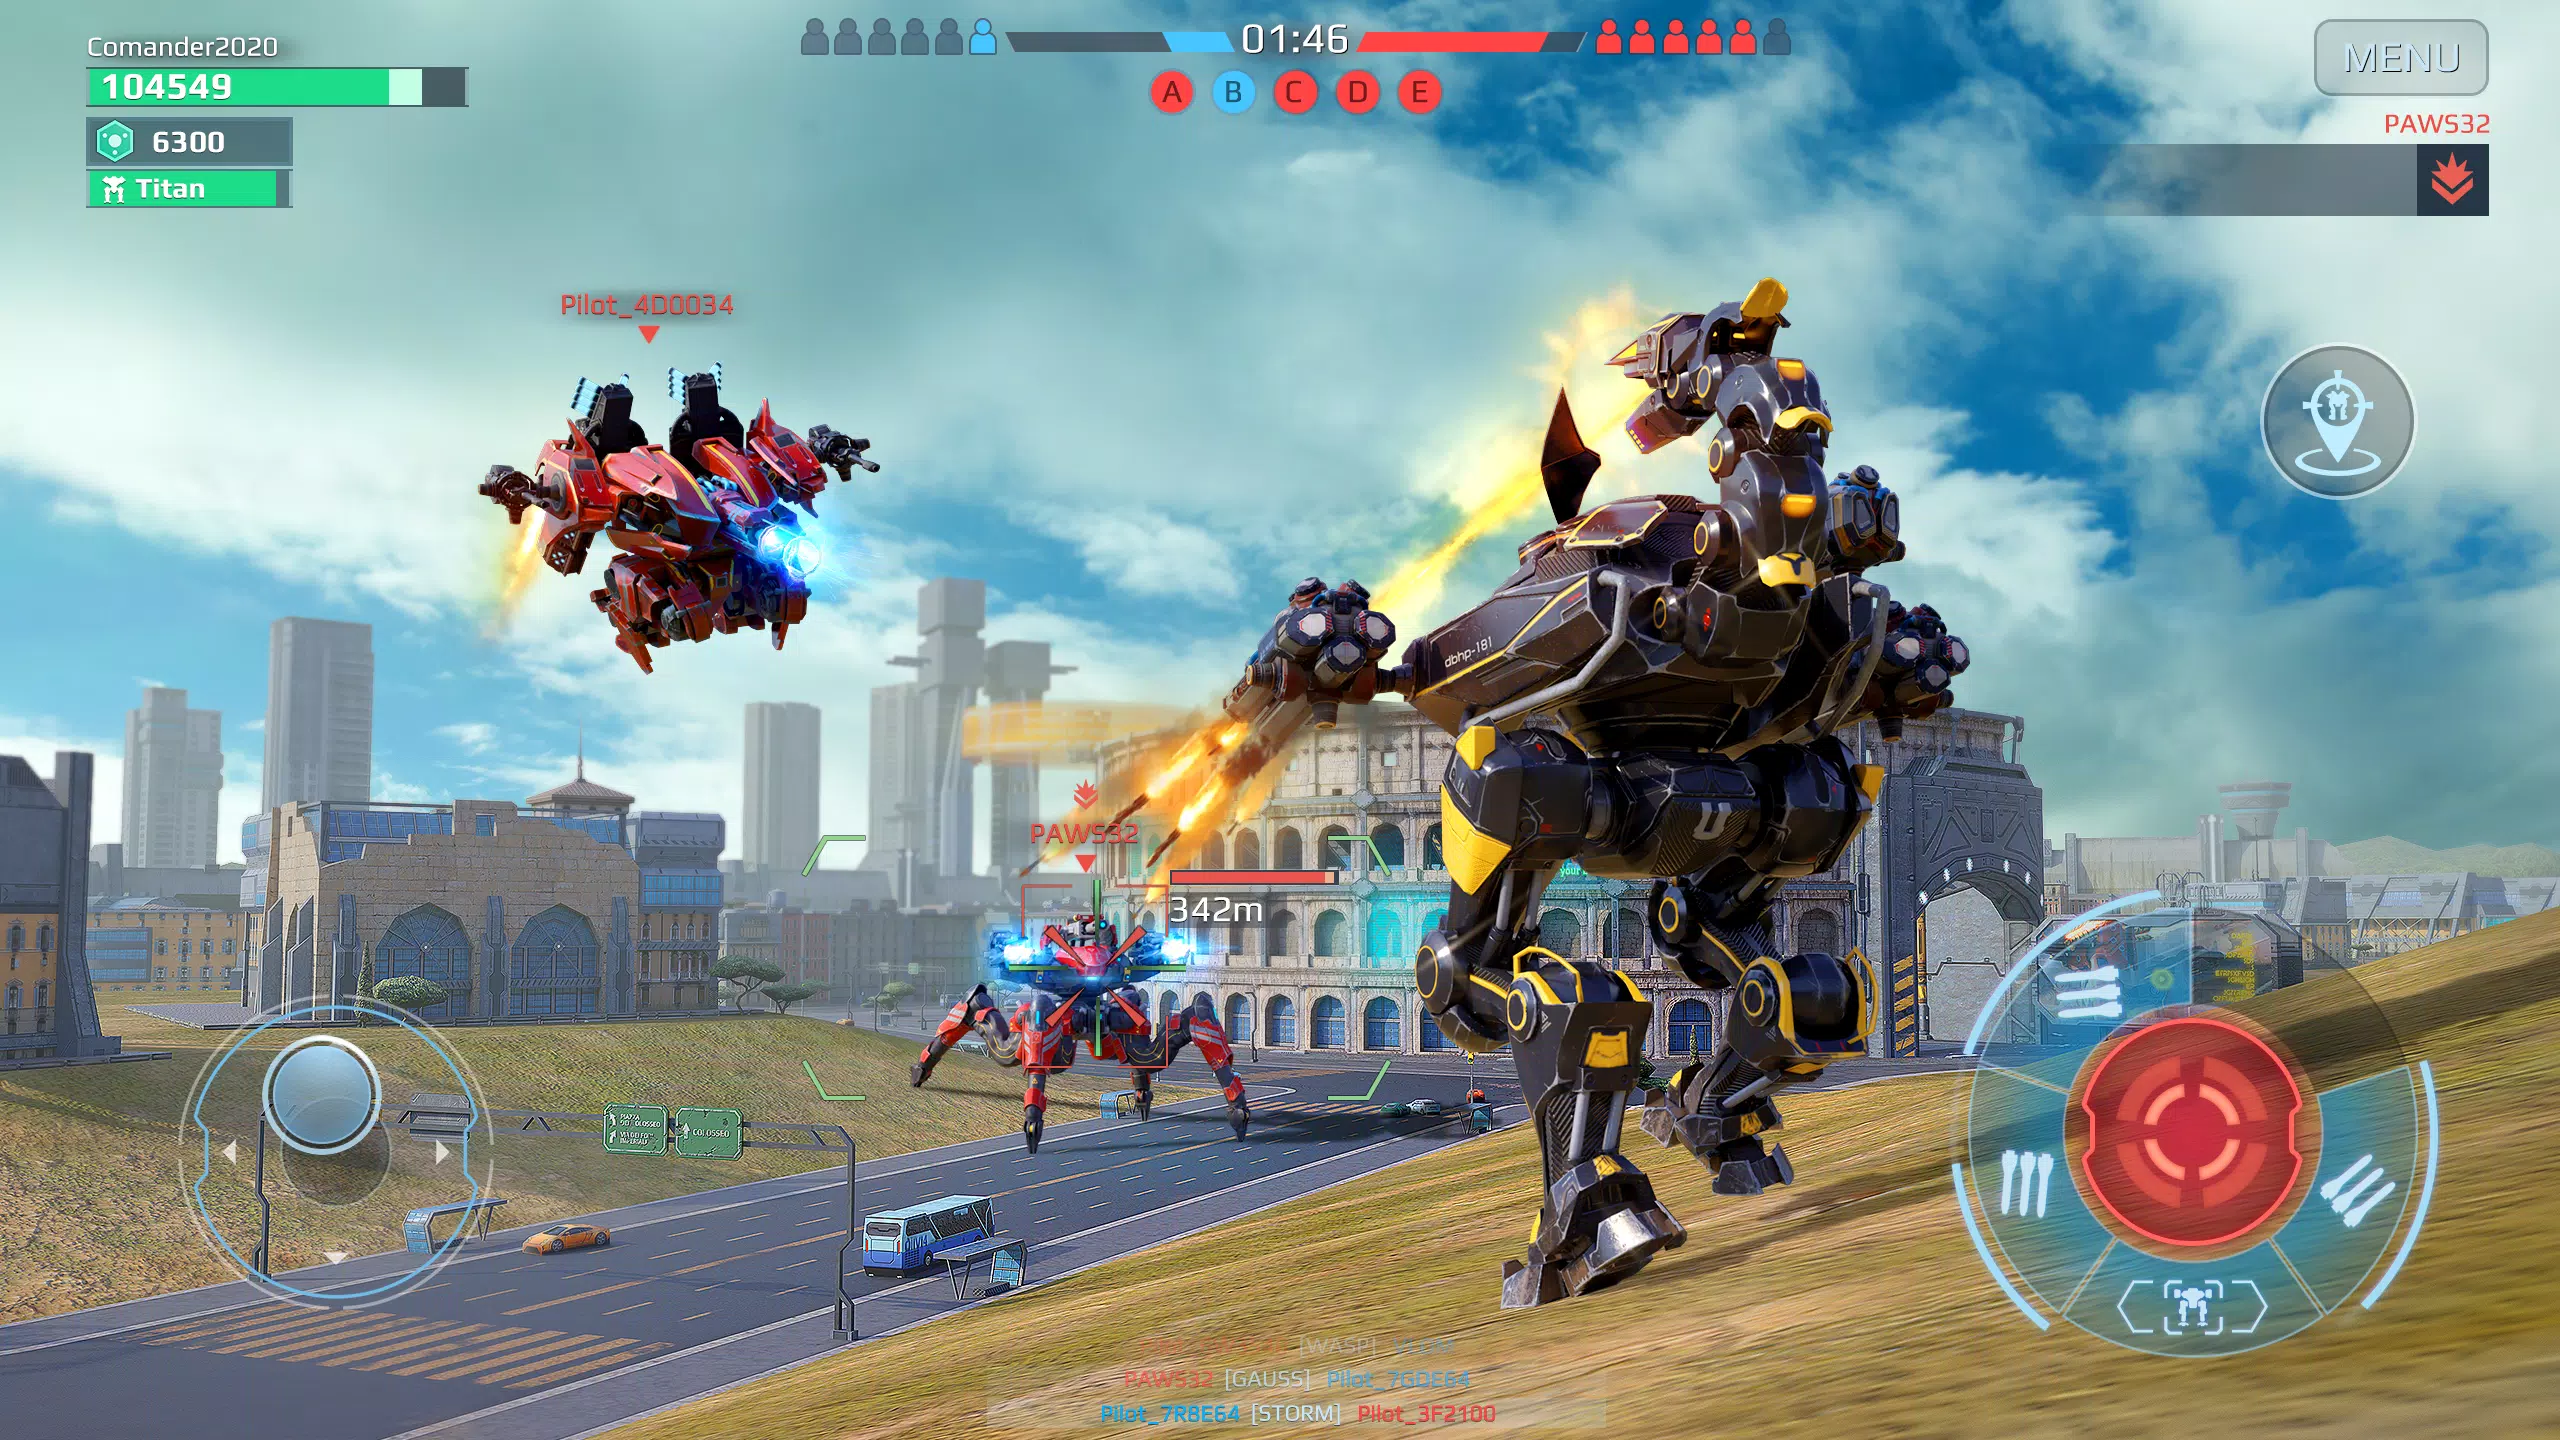 War Robots for Android - APK Download